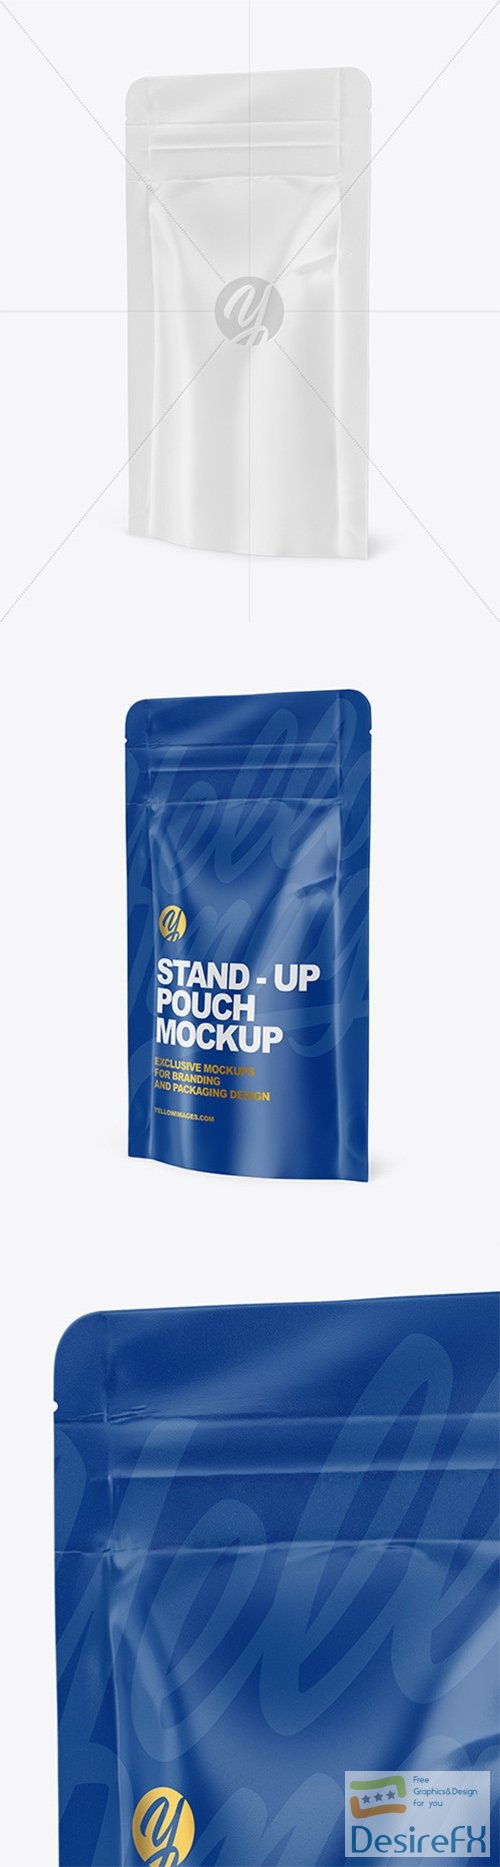 Glossy Stand-Up Pouch Mockup 81843 TIF